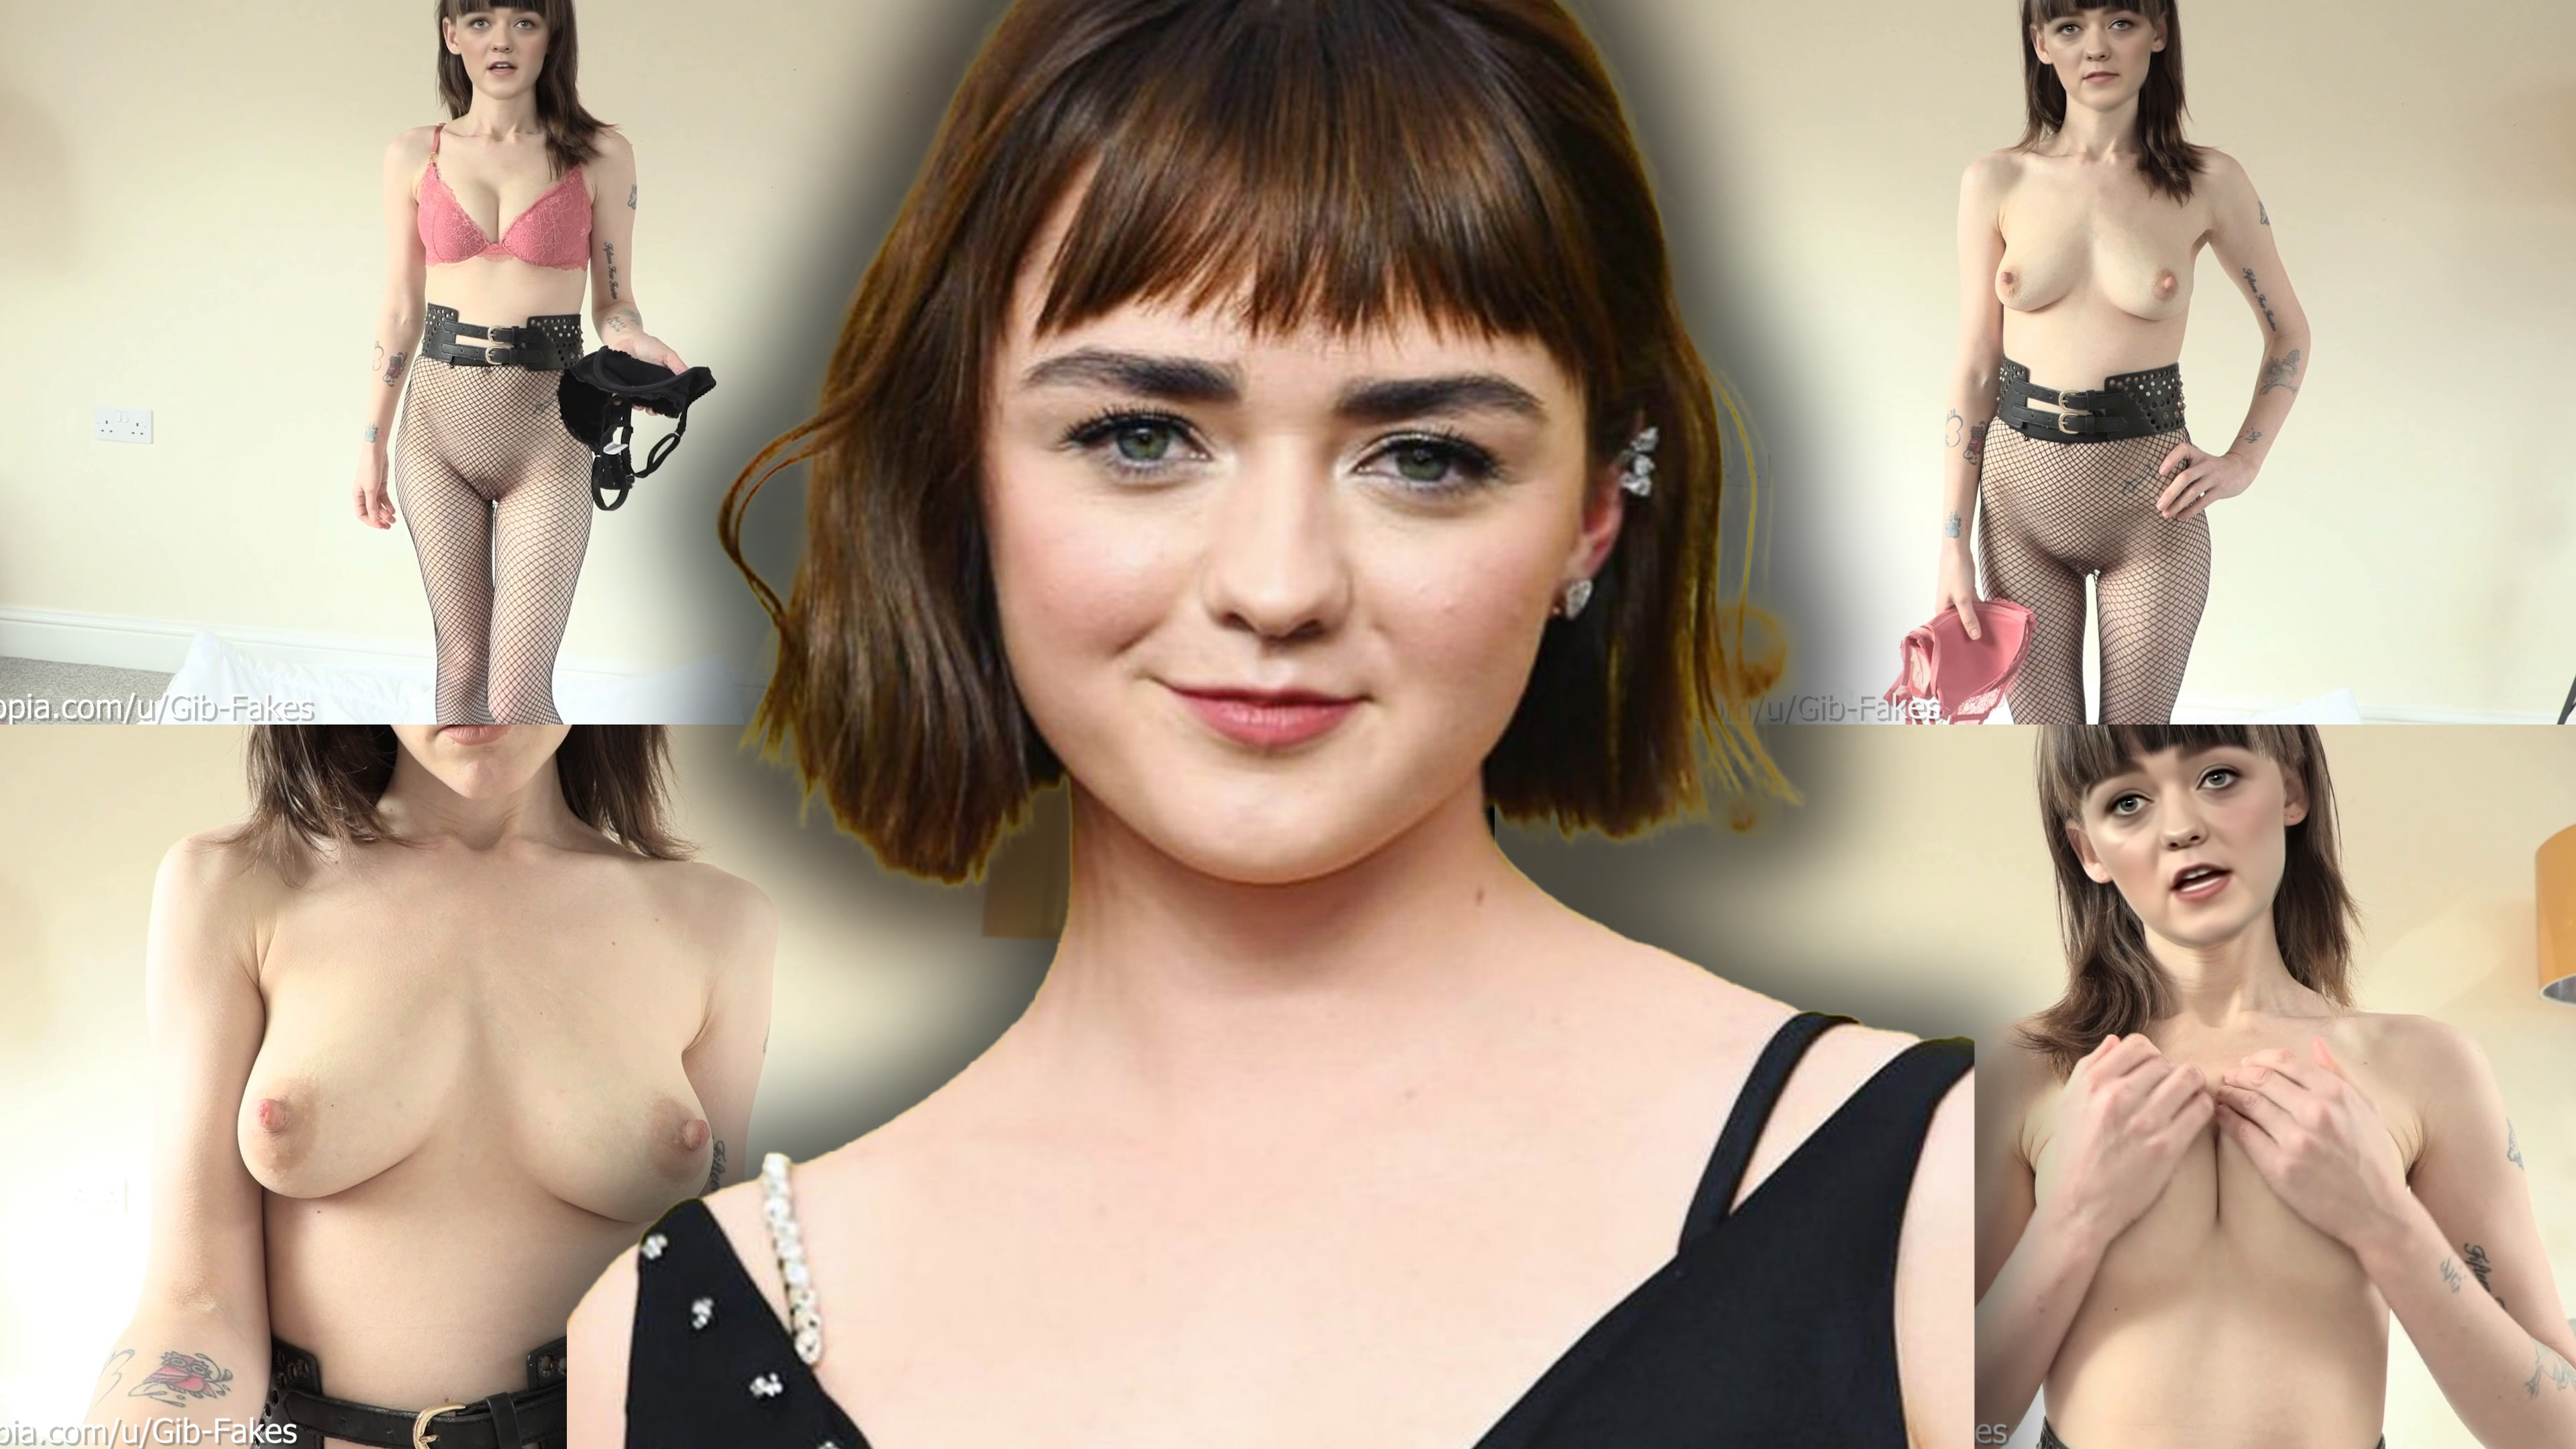 Maisie Williams - Why Are You Cumming In Mommy's Bras?